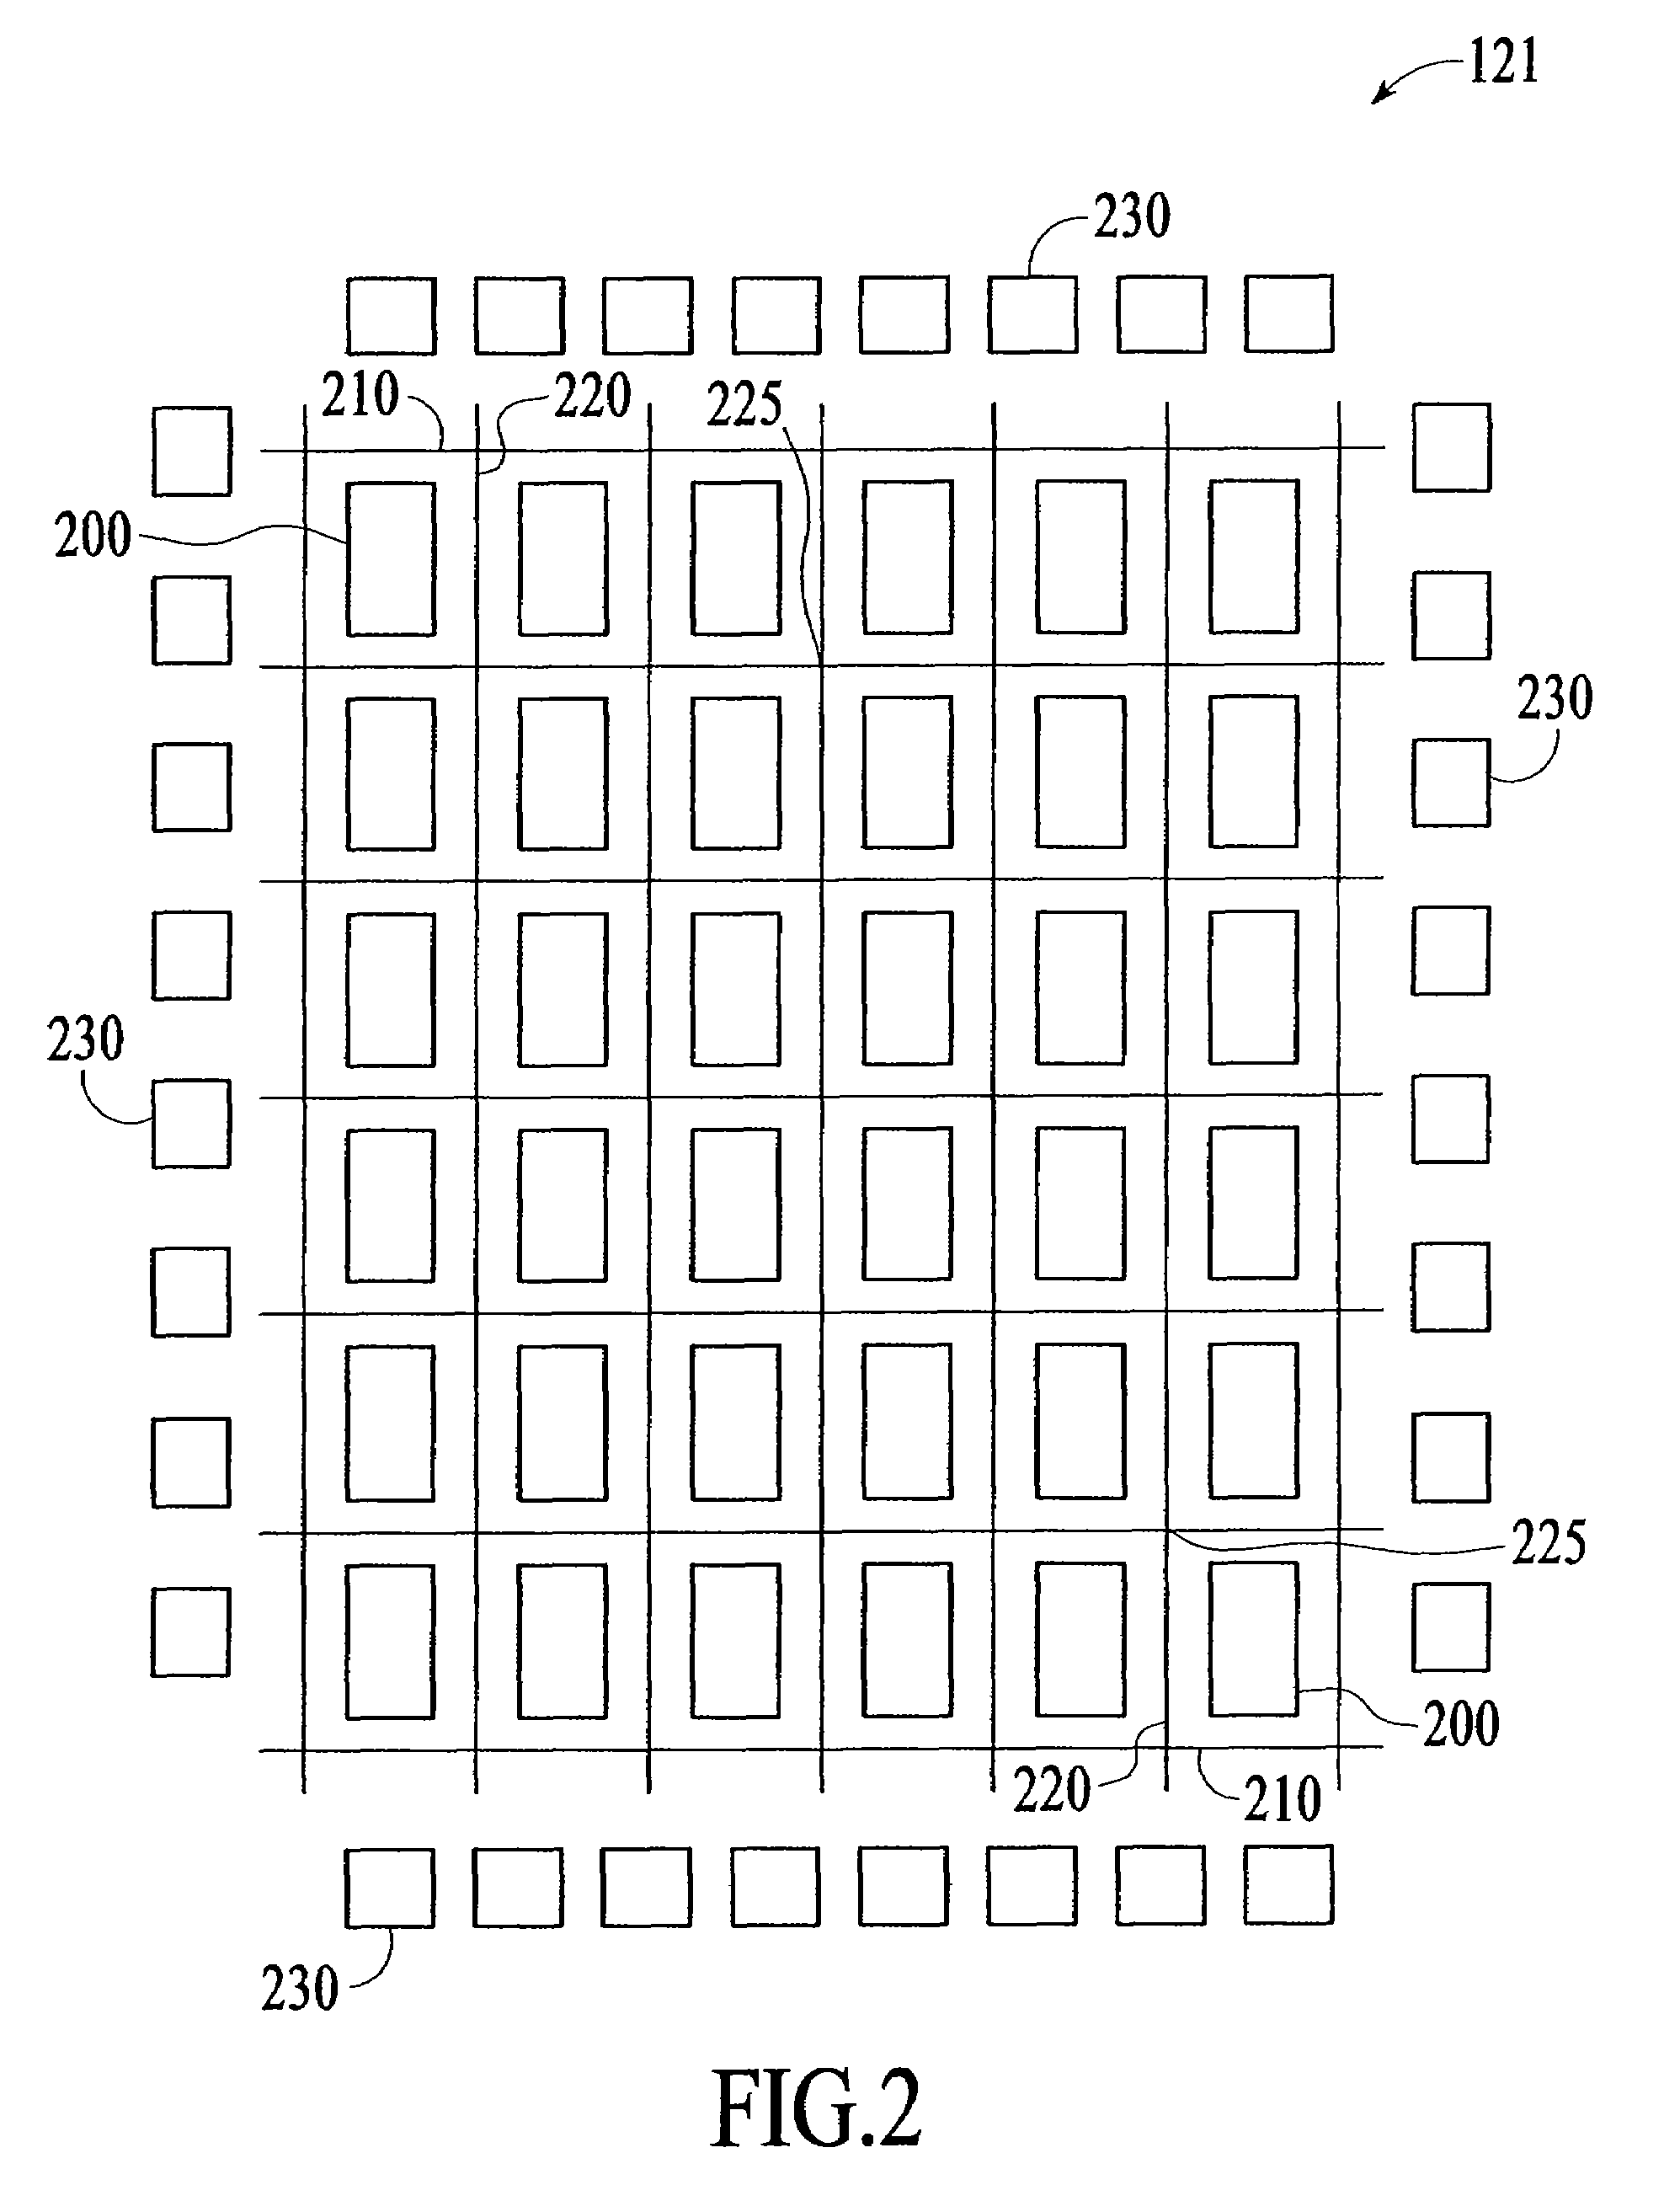 Programmable logic device with on-chip nonvolatile user memory